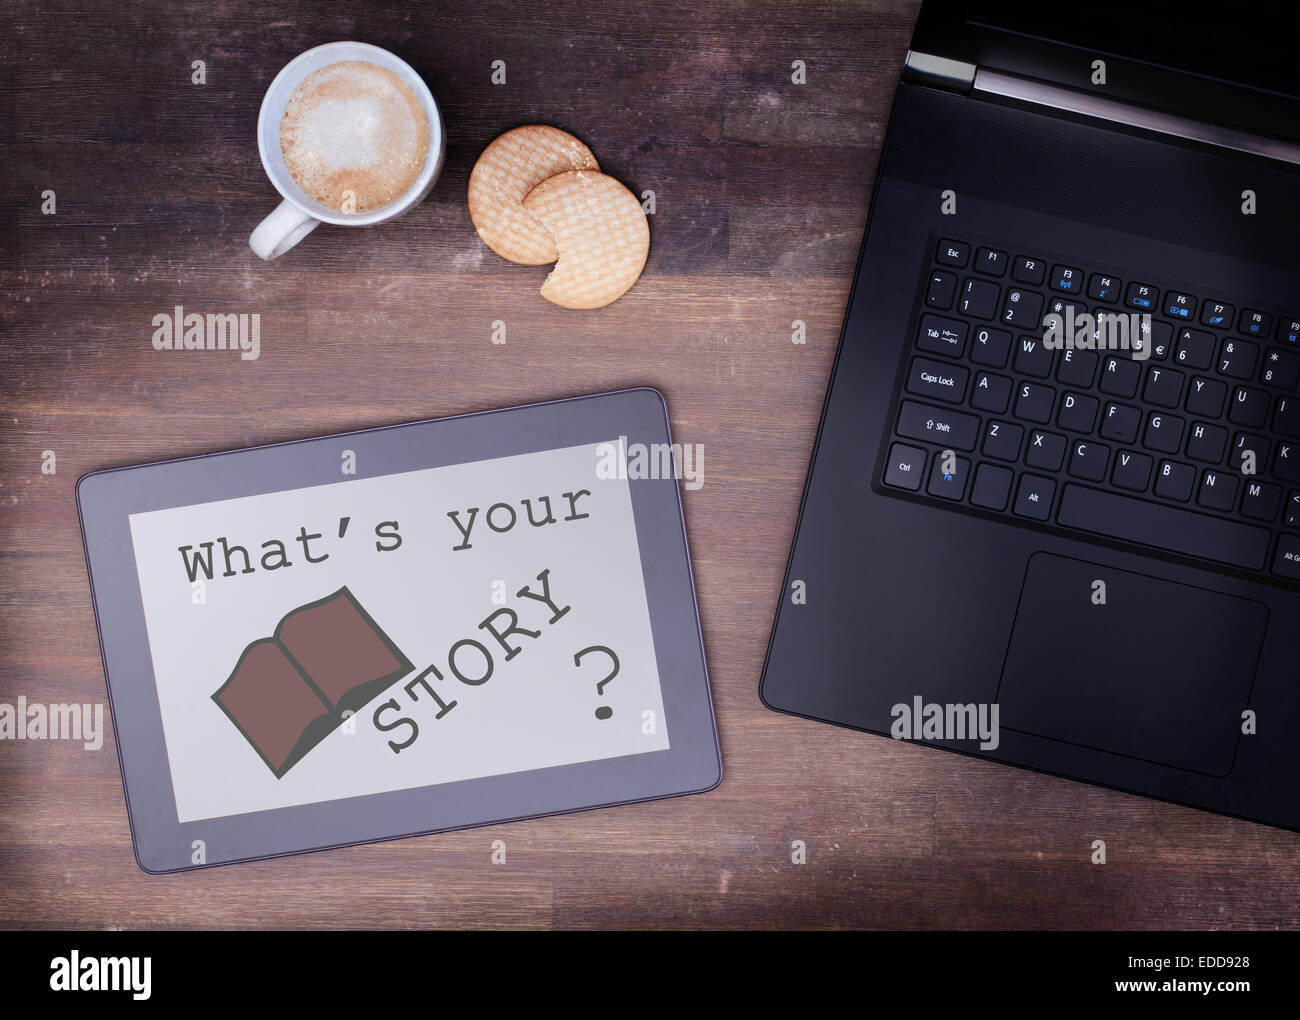 Tablet touch computer gadget on wooden table, what's your story, vintage look Stock Photo